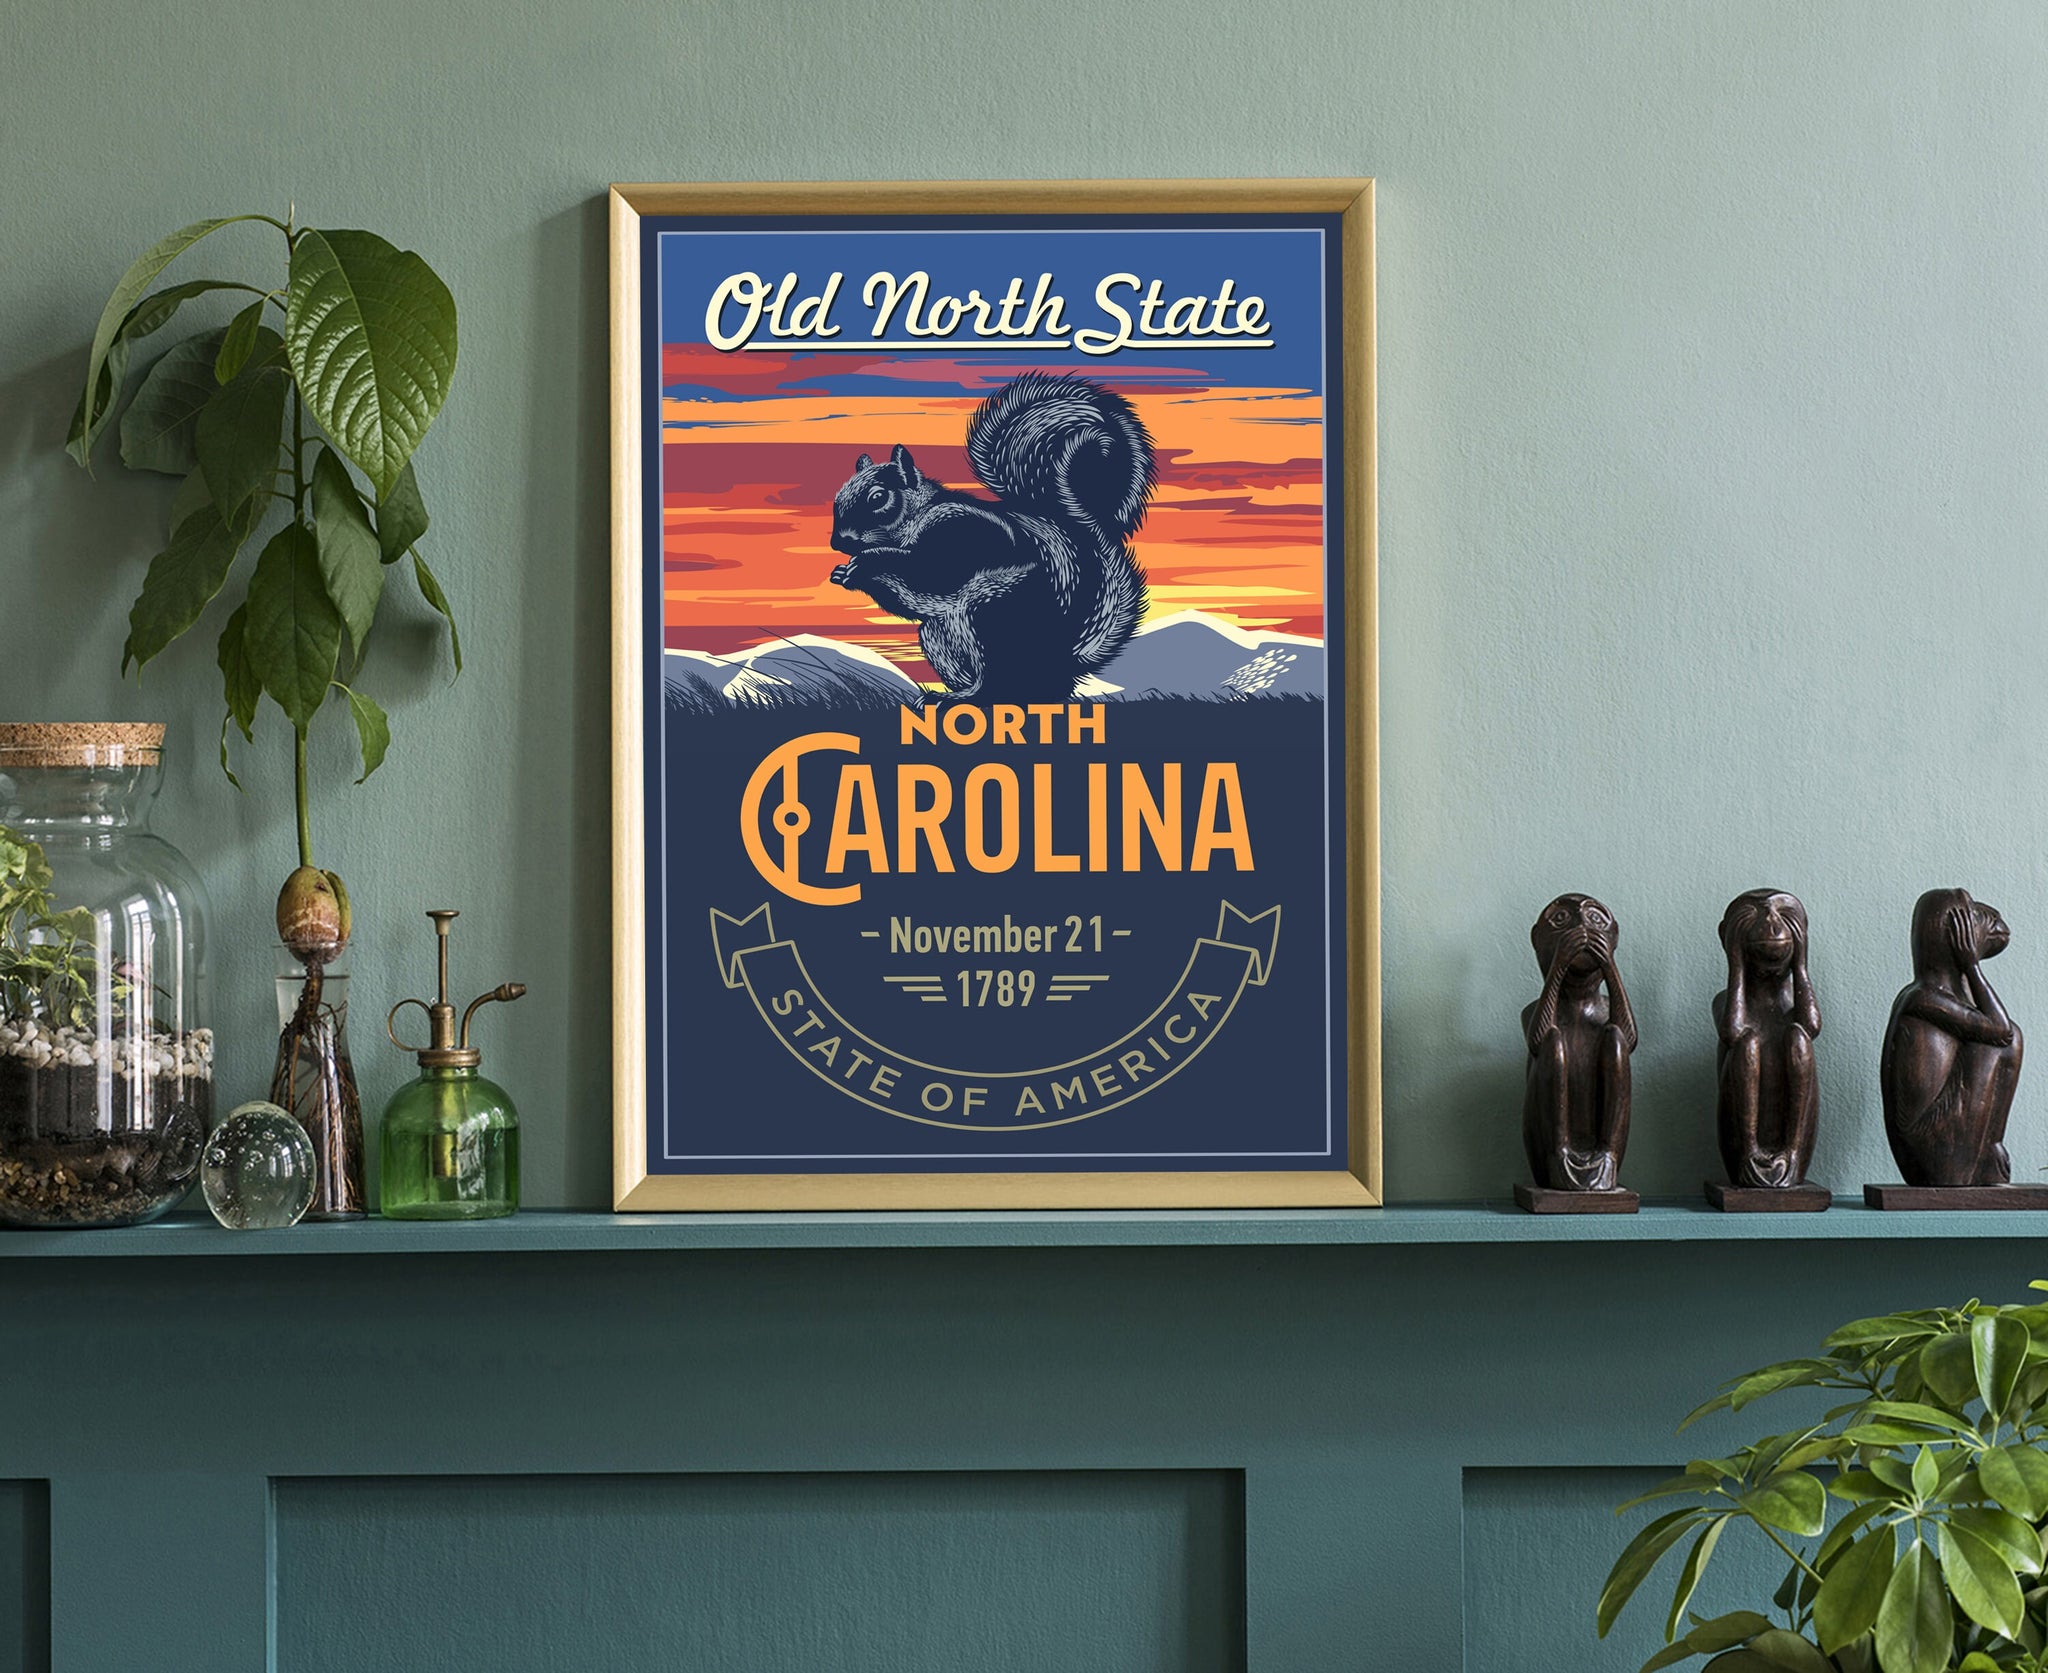 United States Poster, North Carolina State Poster Print, North Carolina State Emblem Poster, Retro Travel State Poster, Home Office Wall Art